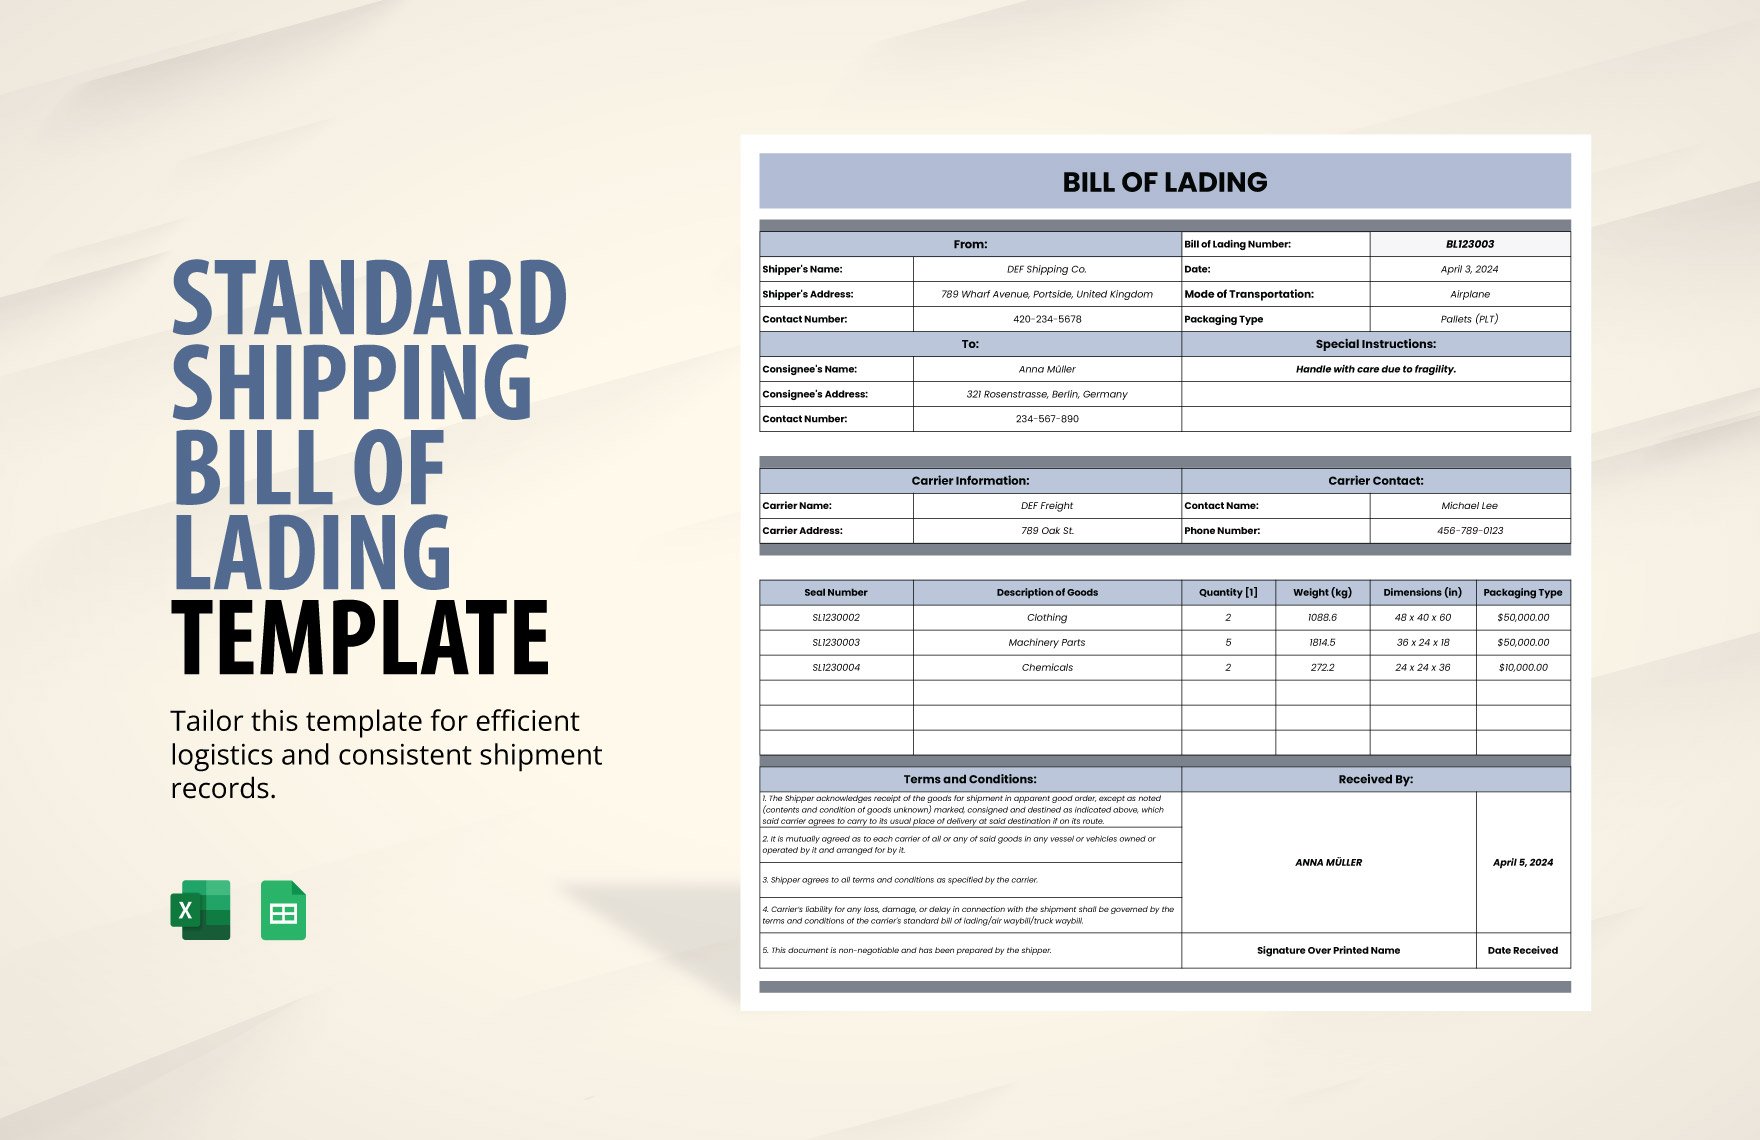 Standard Shipping Bill of Lading Template in Excel, Google Sheets